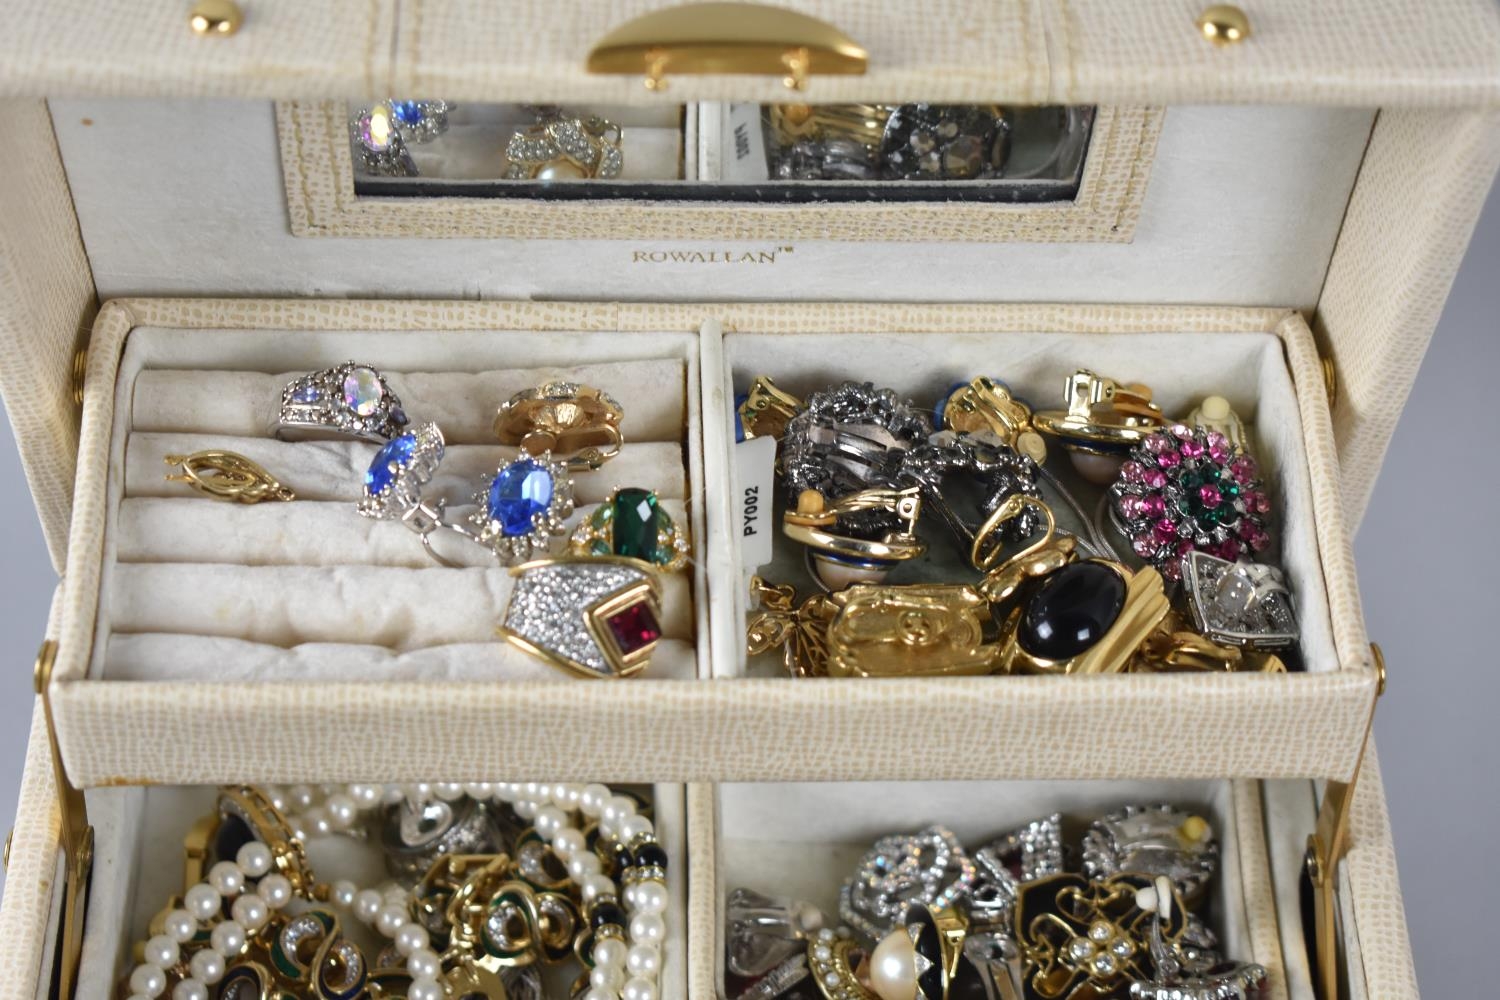 A Fitted Rowallan Jewellery box Containing Large Quantity of Costume Jewellery to include Trifari - Image 5 of 5